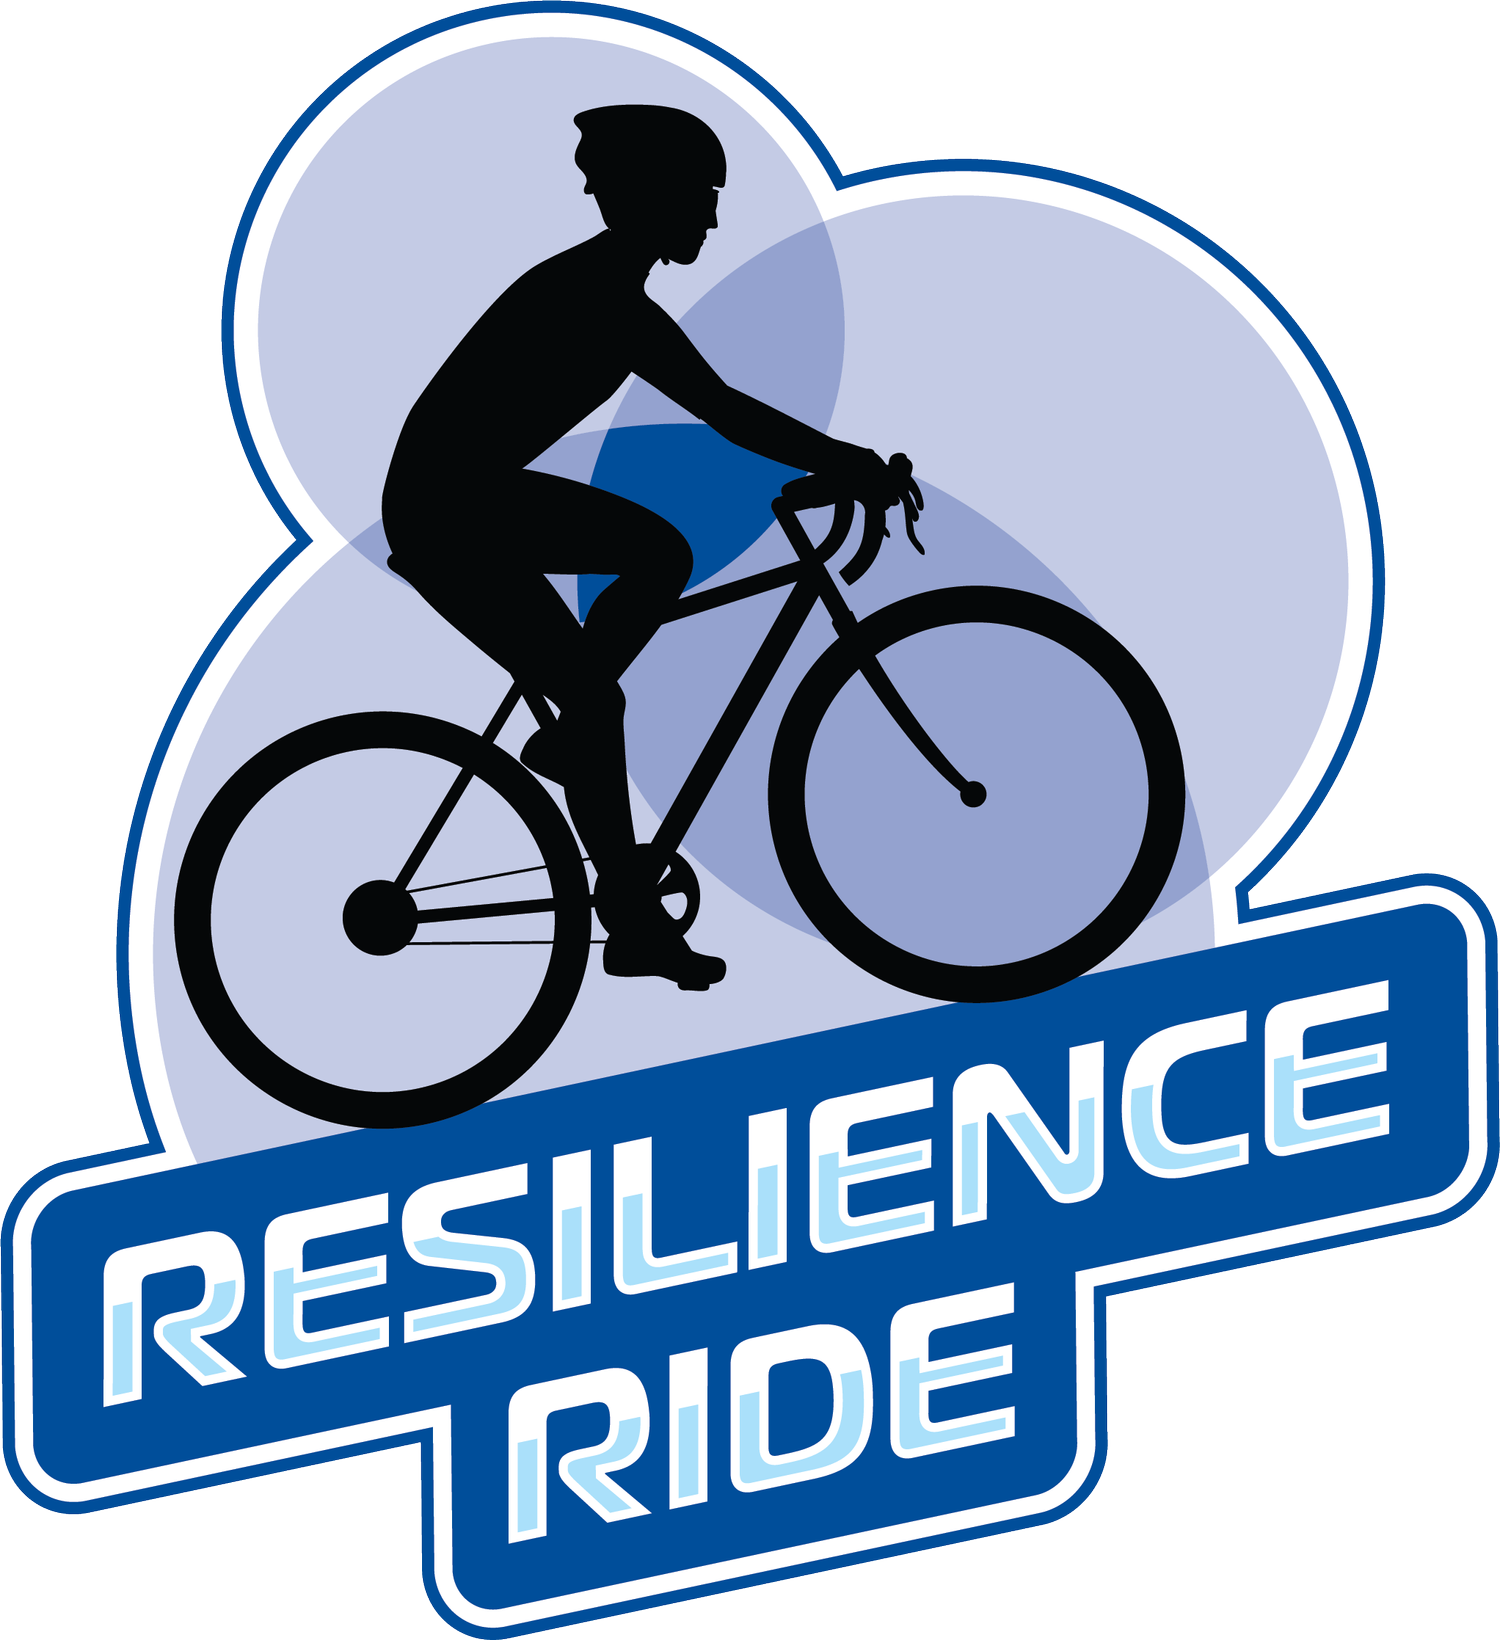 RESILIENCE RIDE!